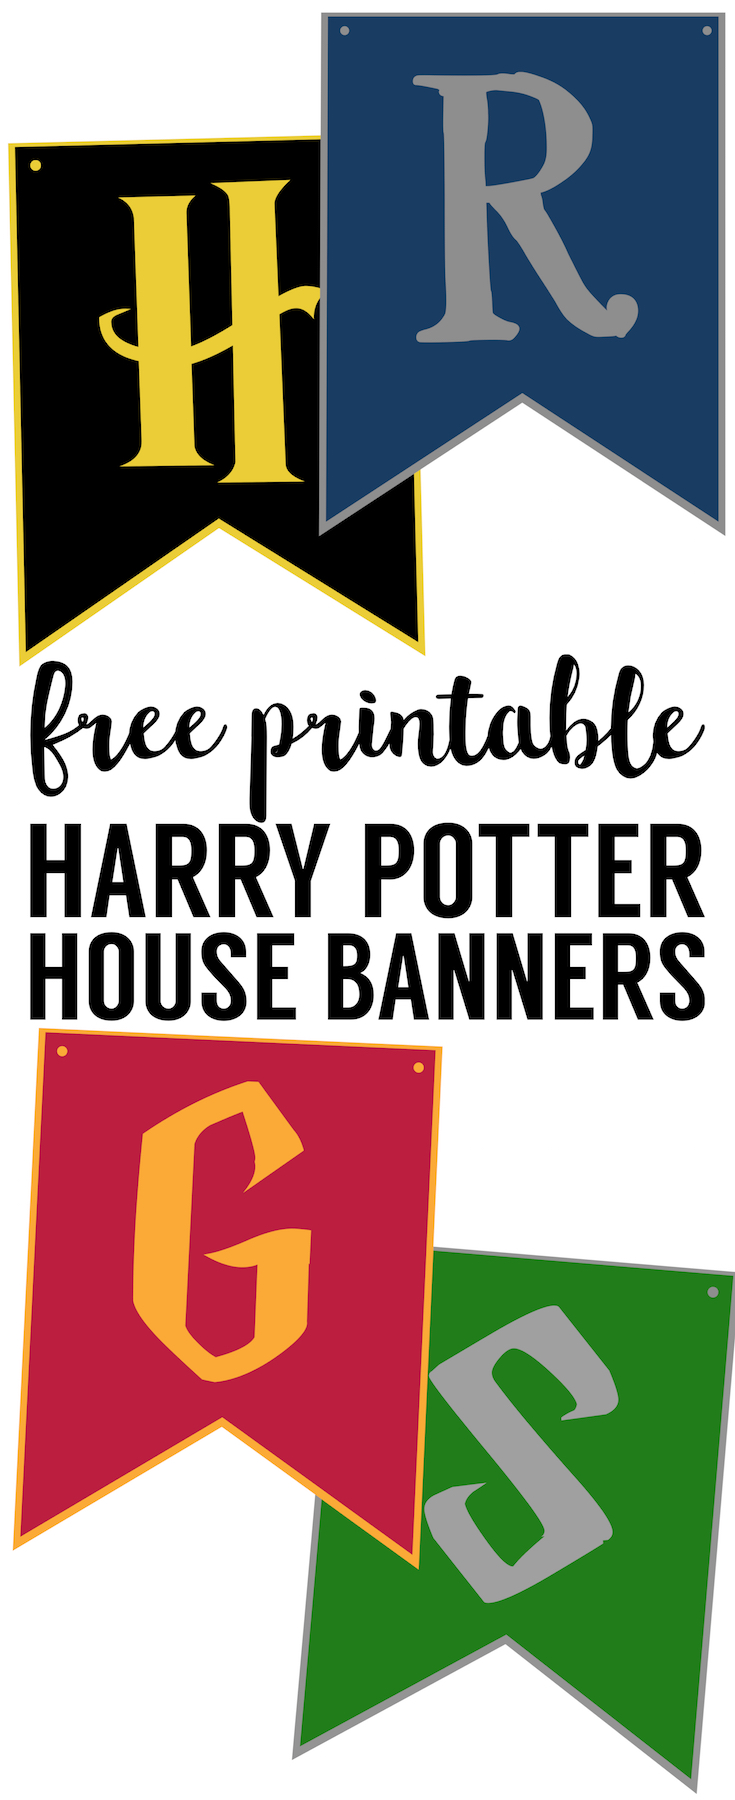 Harry Potter House Banners Printable